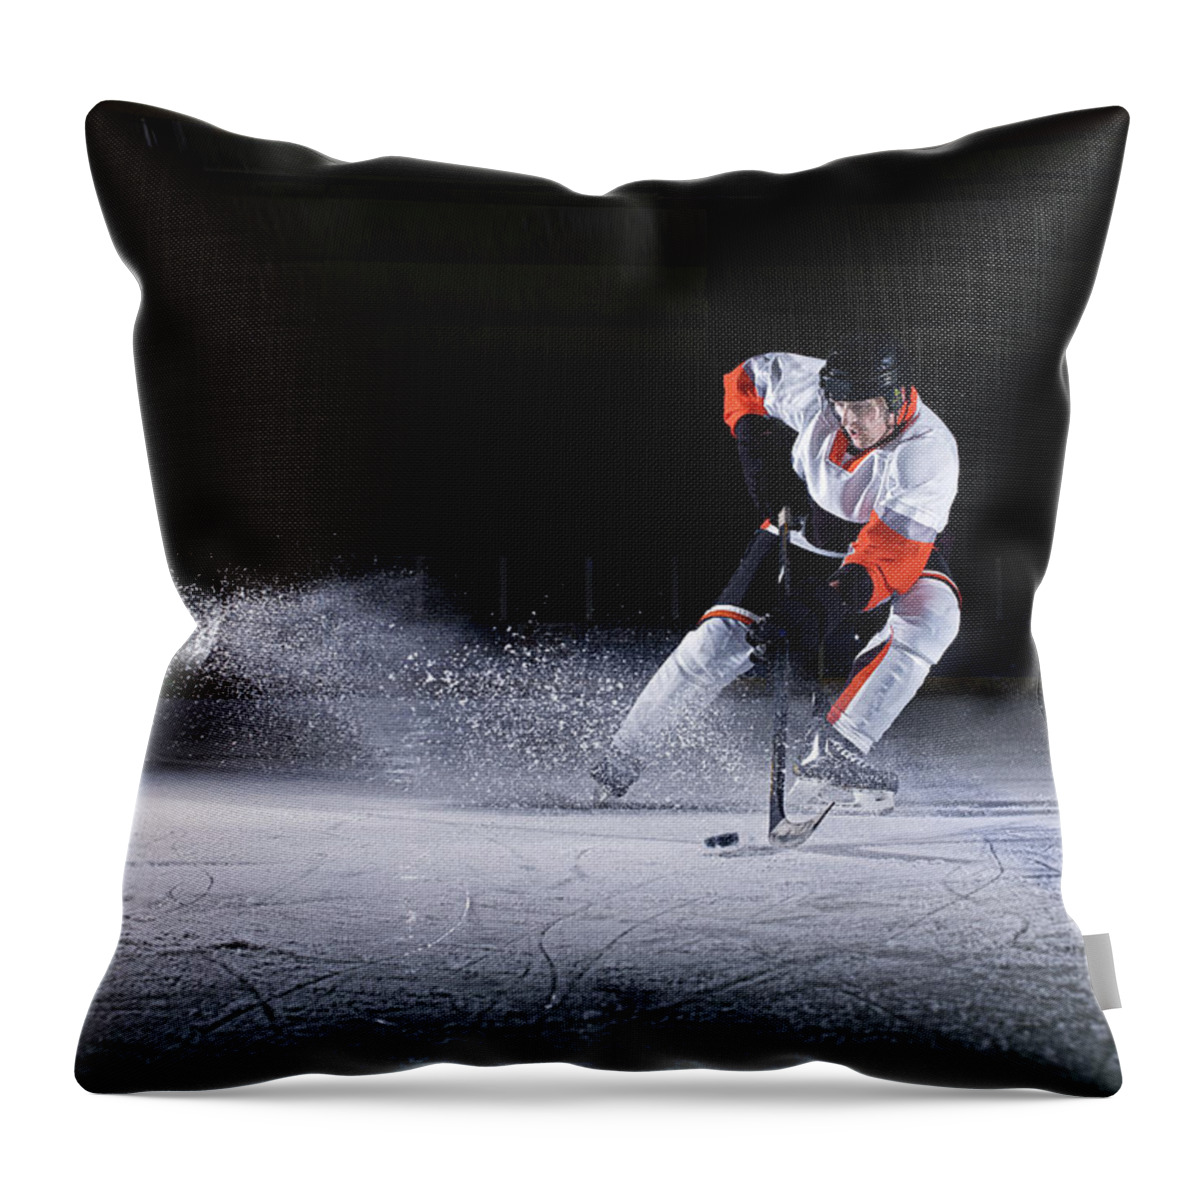 Focus Throw Pillow featuring the photograph Male Ice Hockey Player Taking Puck by Mike Harrington